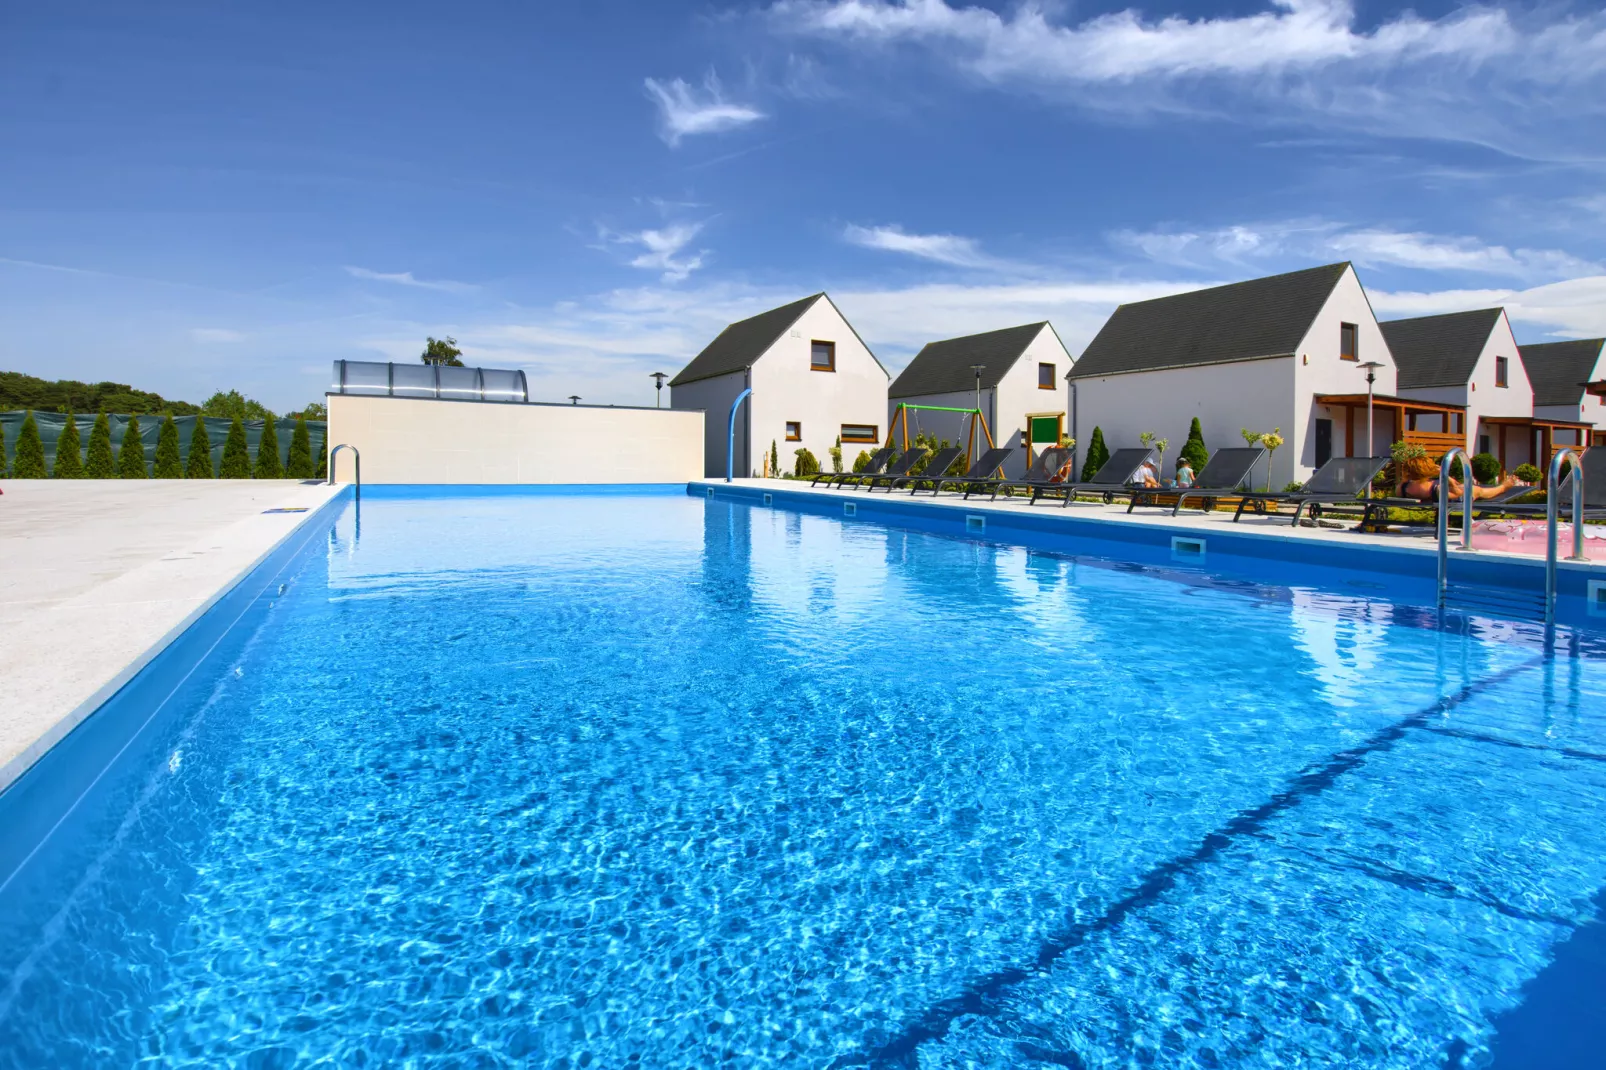 Luxury homes with the pools for 8 persons